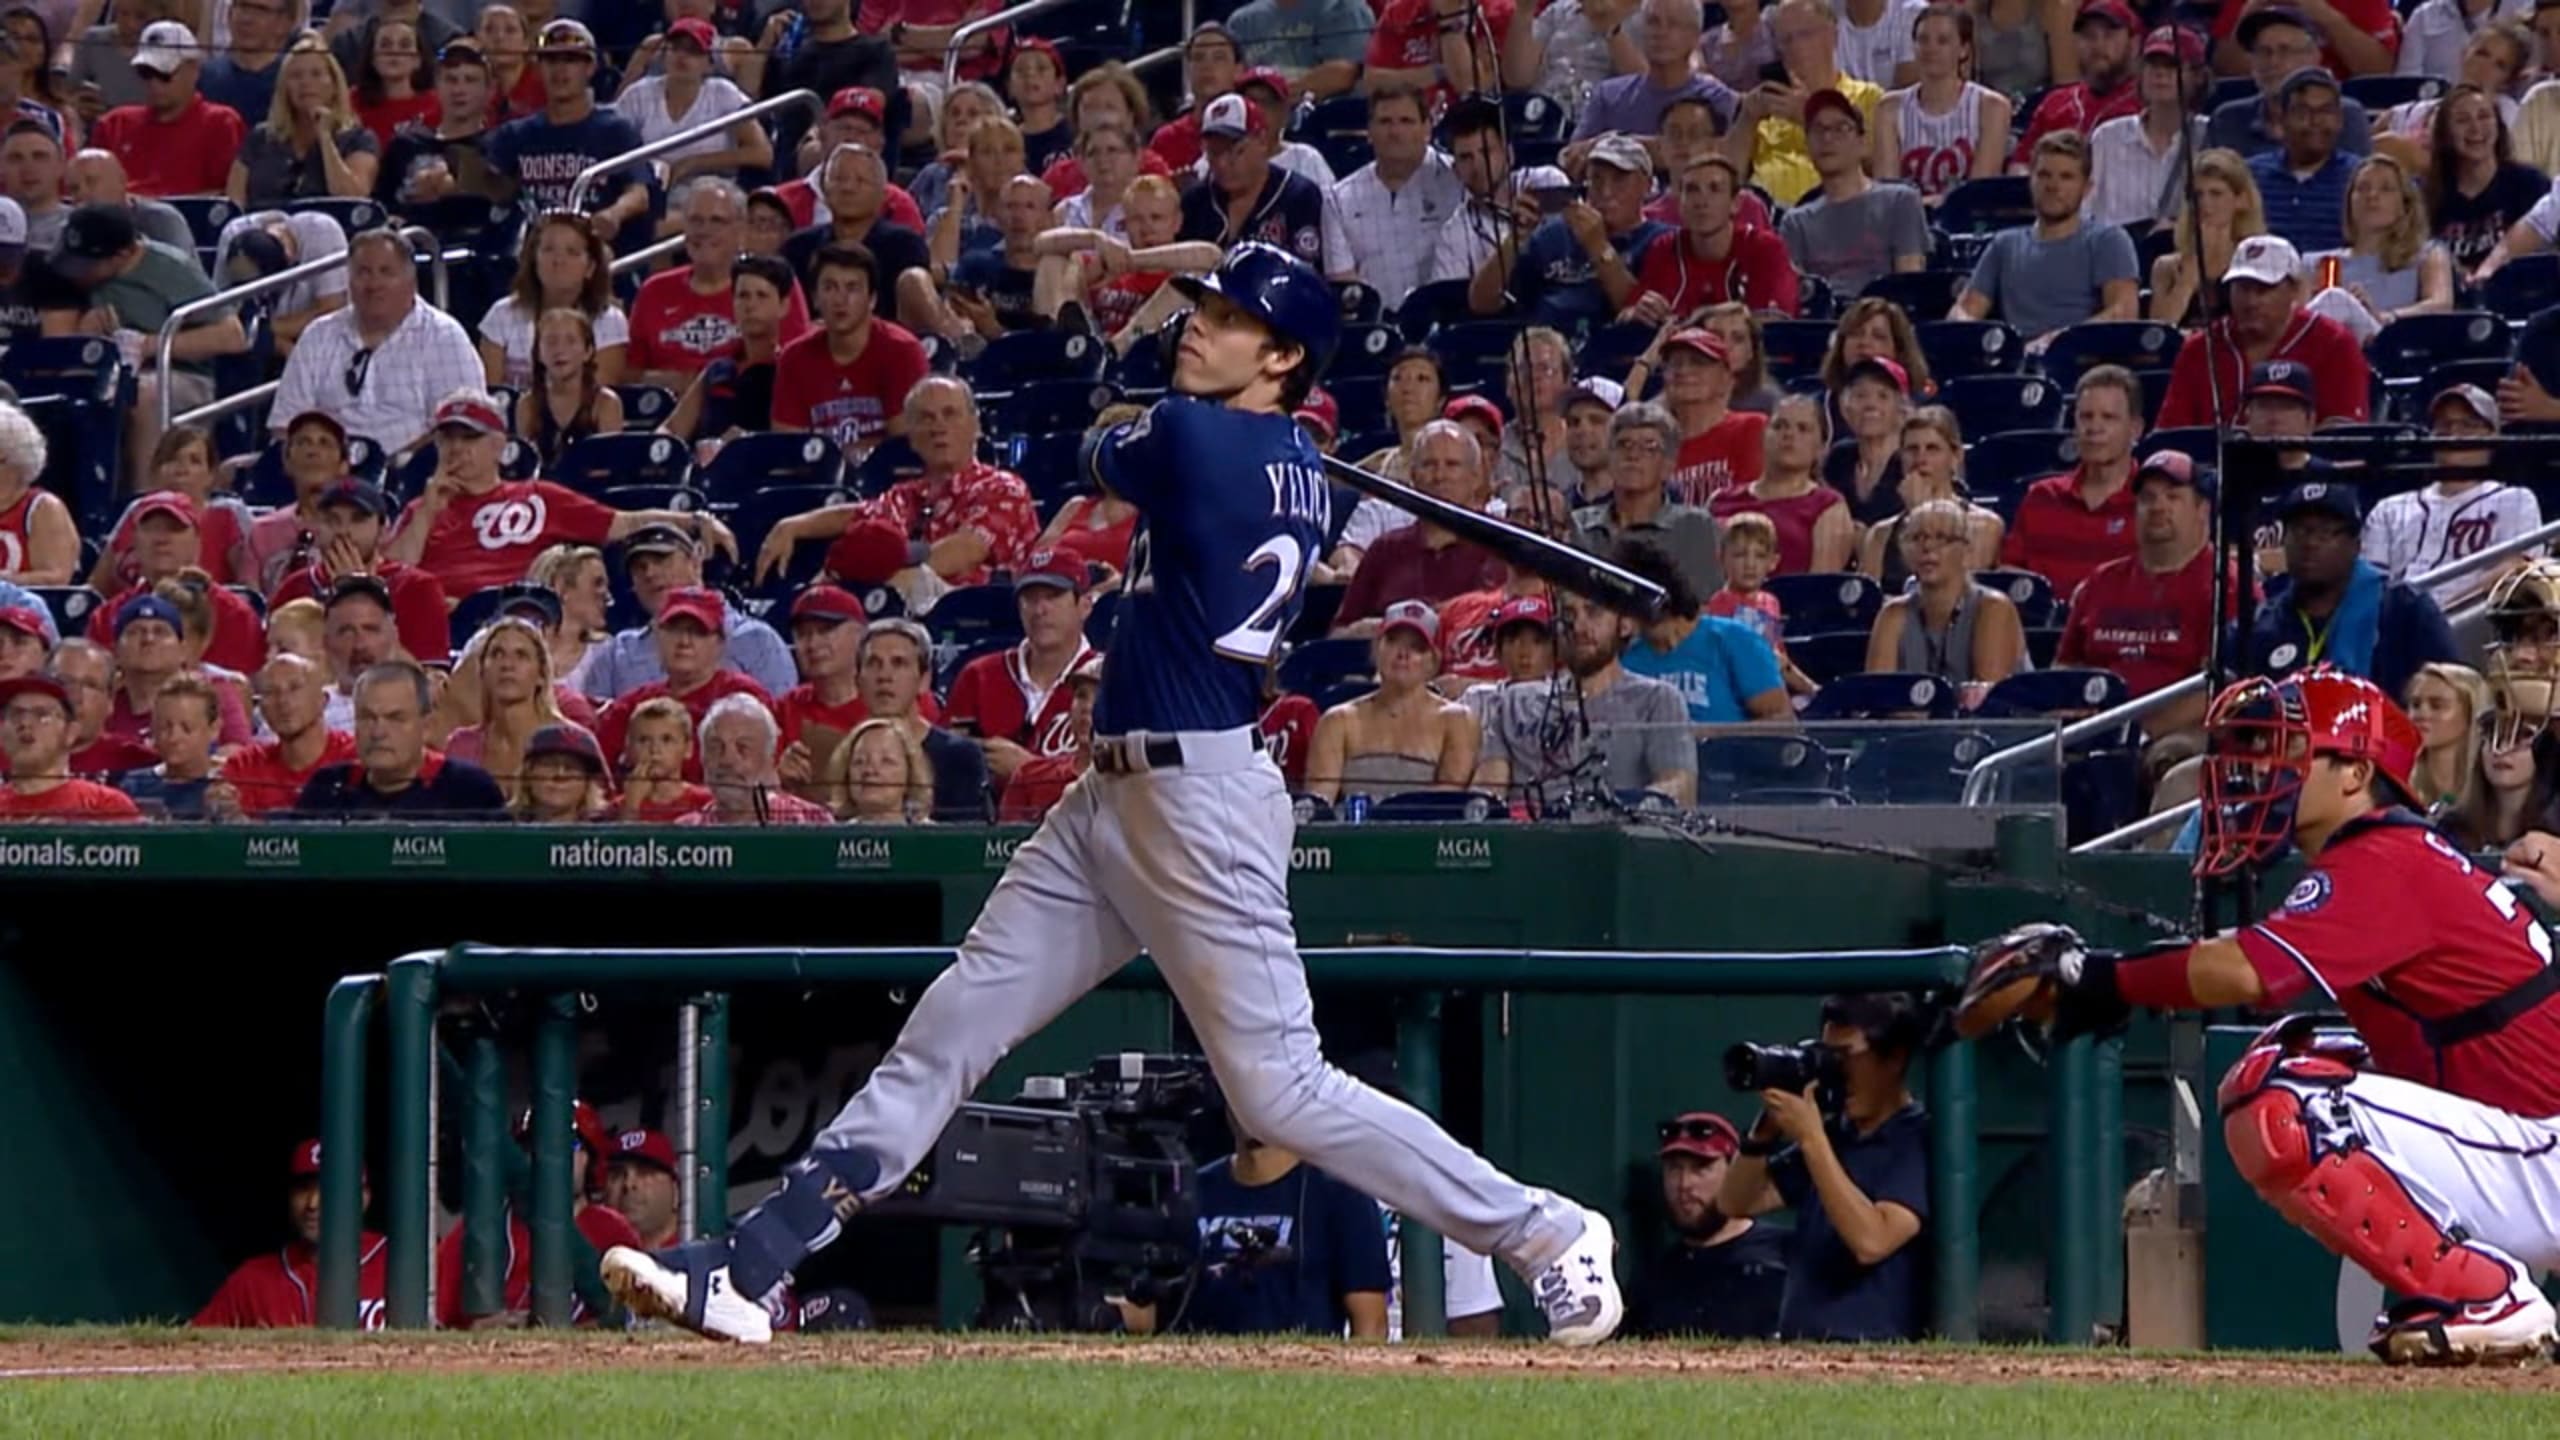 Images from the Brewers' 15-14 victory over the Nationals in 14 innings